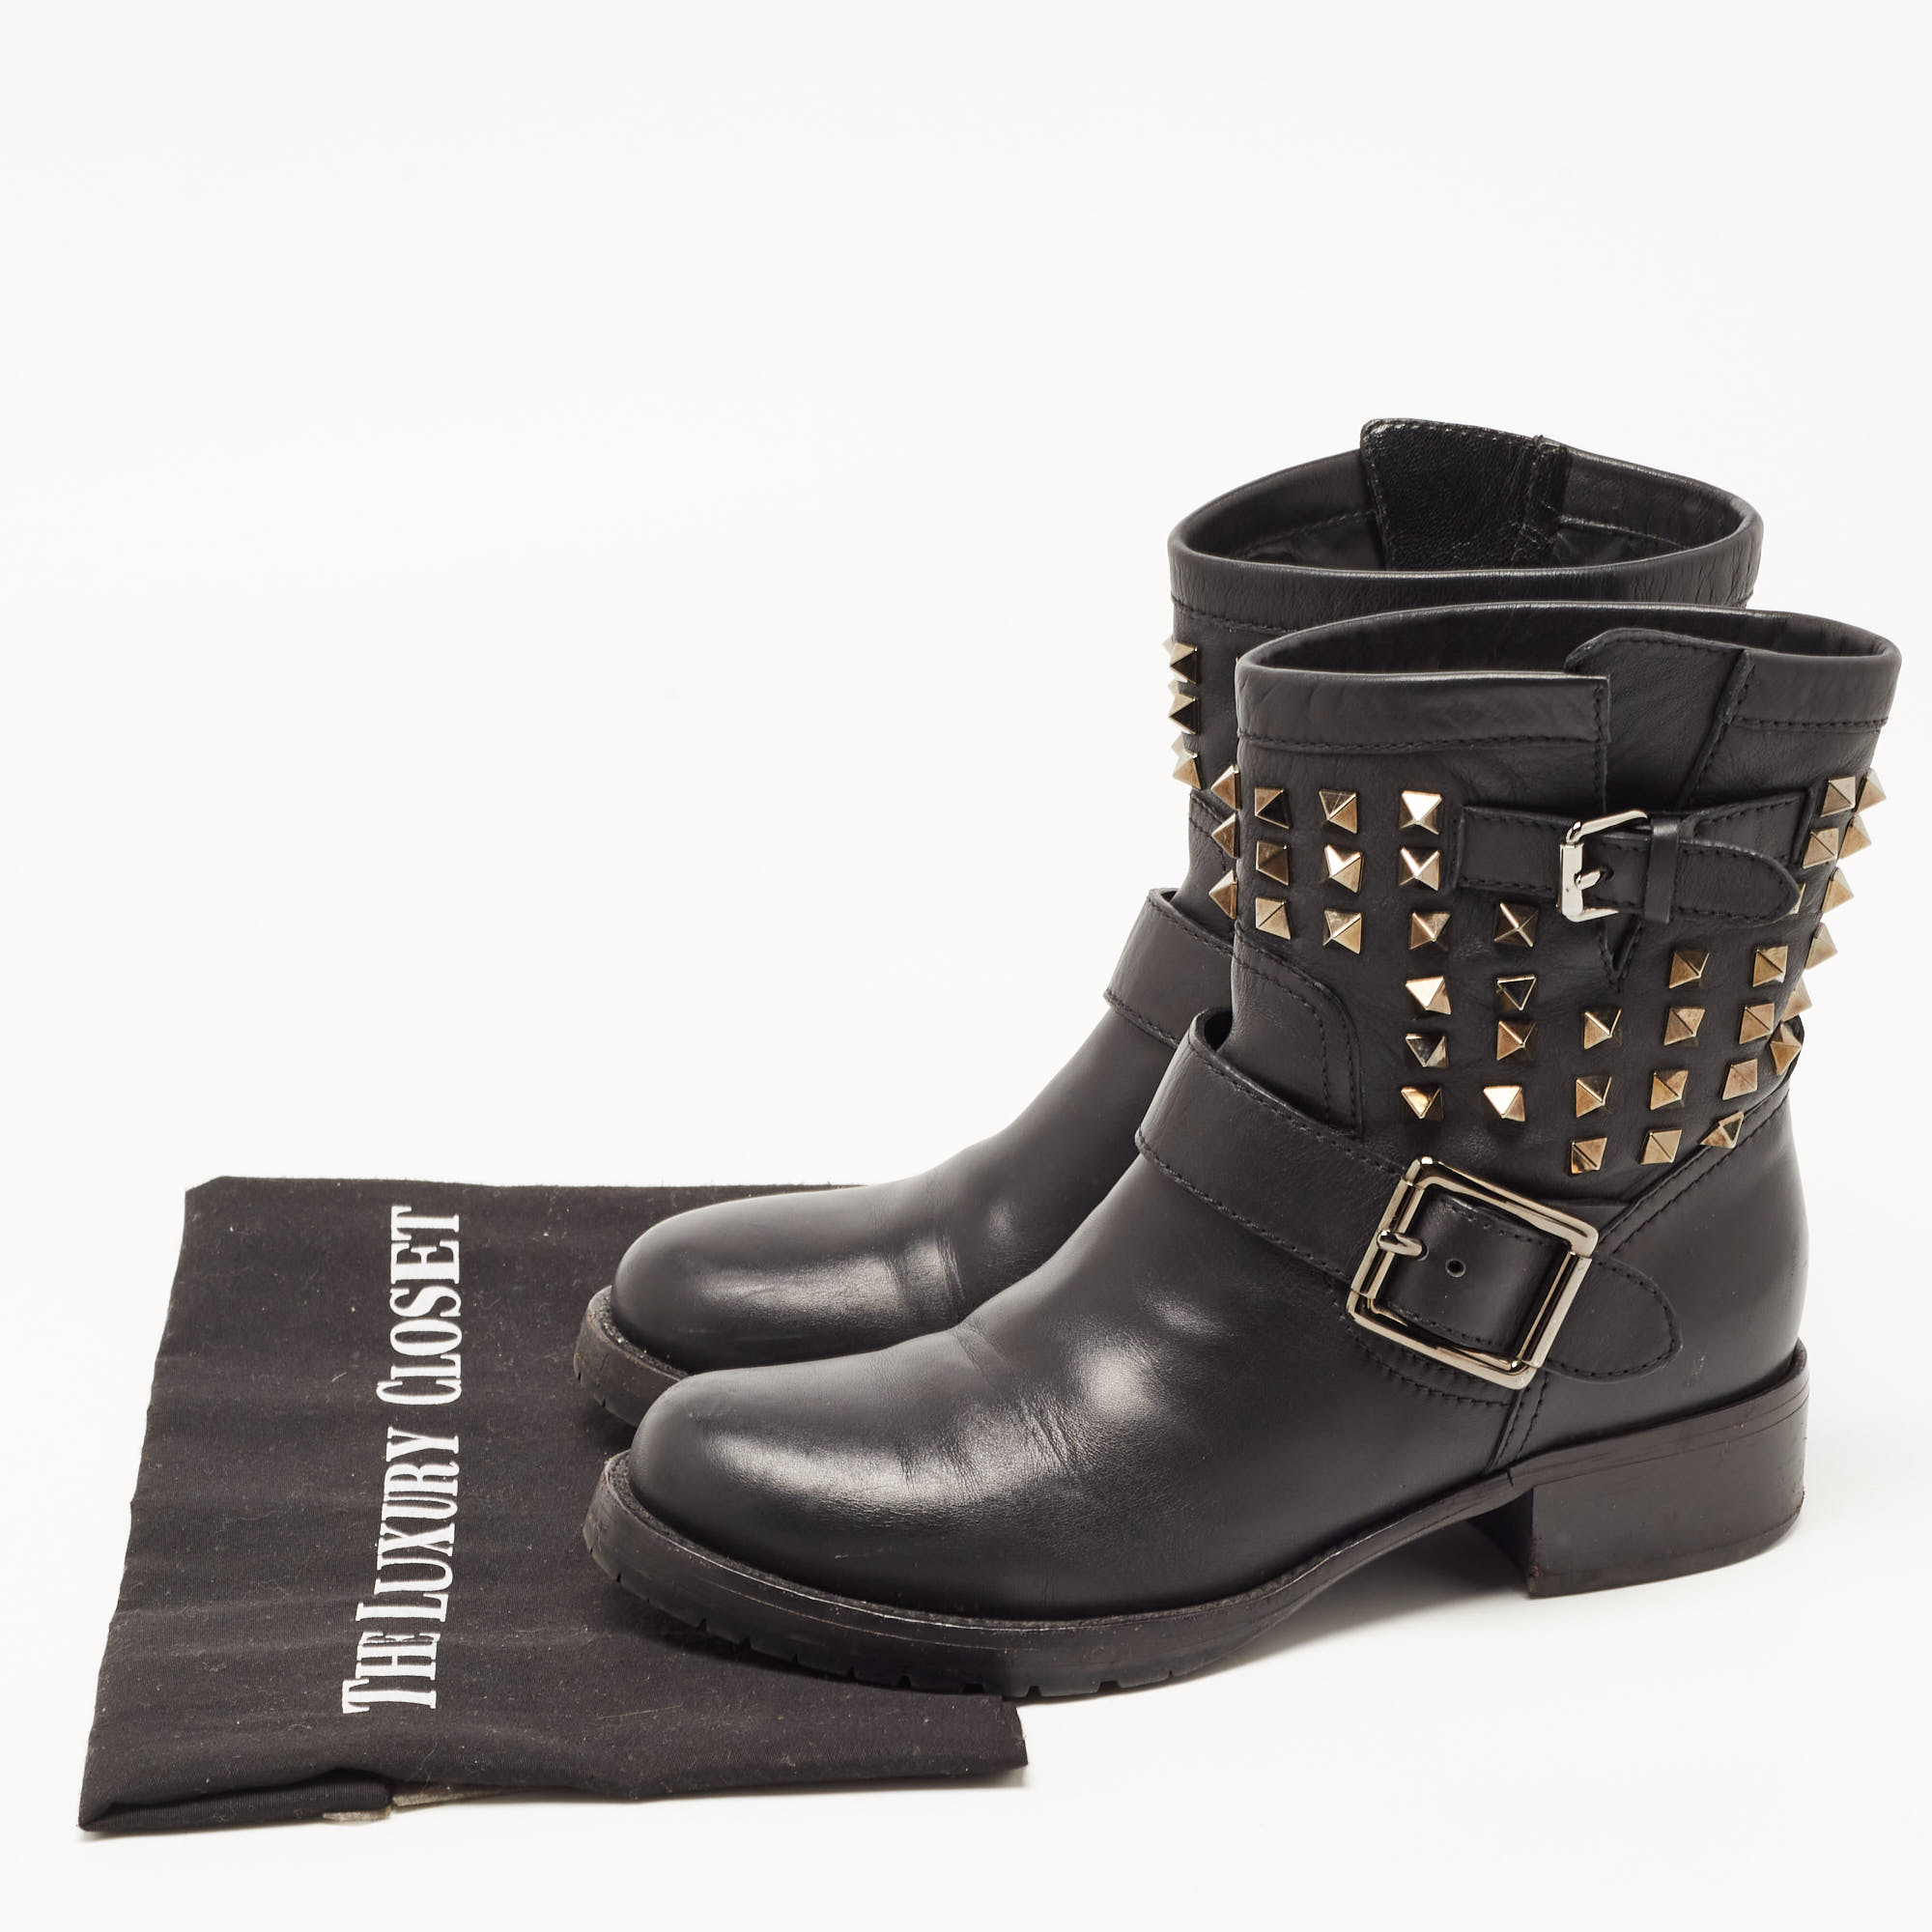 Valentino Black Leather Rockstud Ankle Boots Size 37